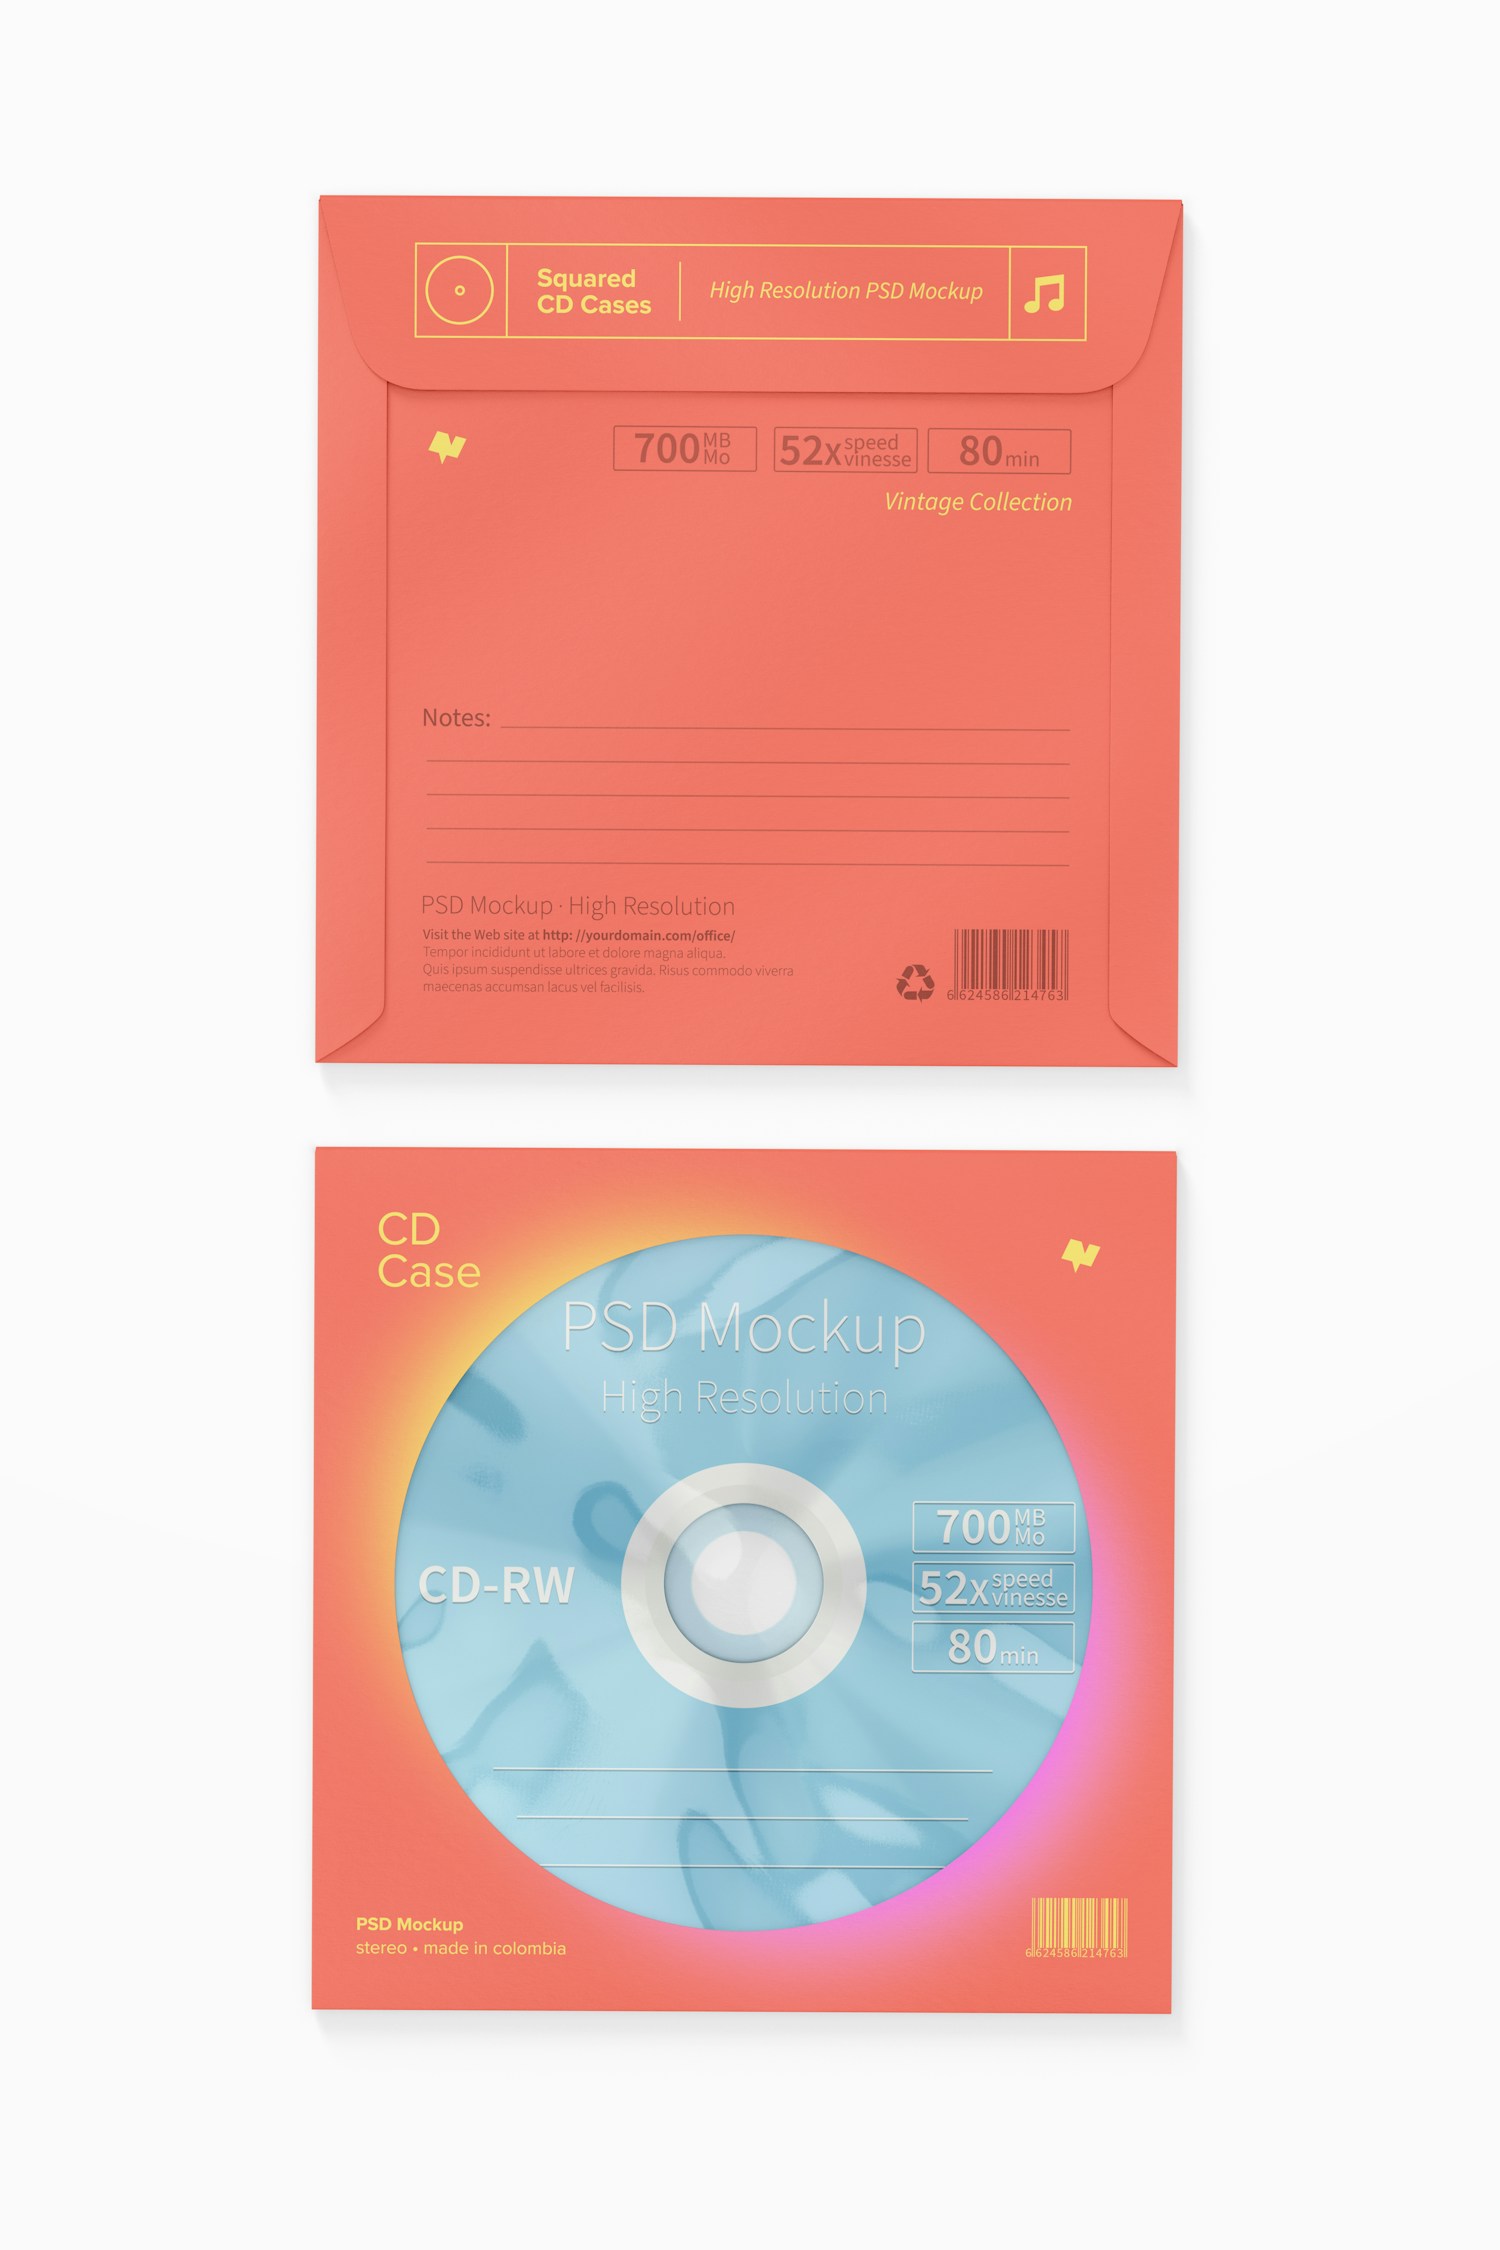 Squared CD Cases Mockup, Top View